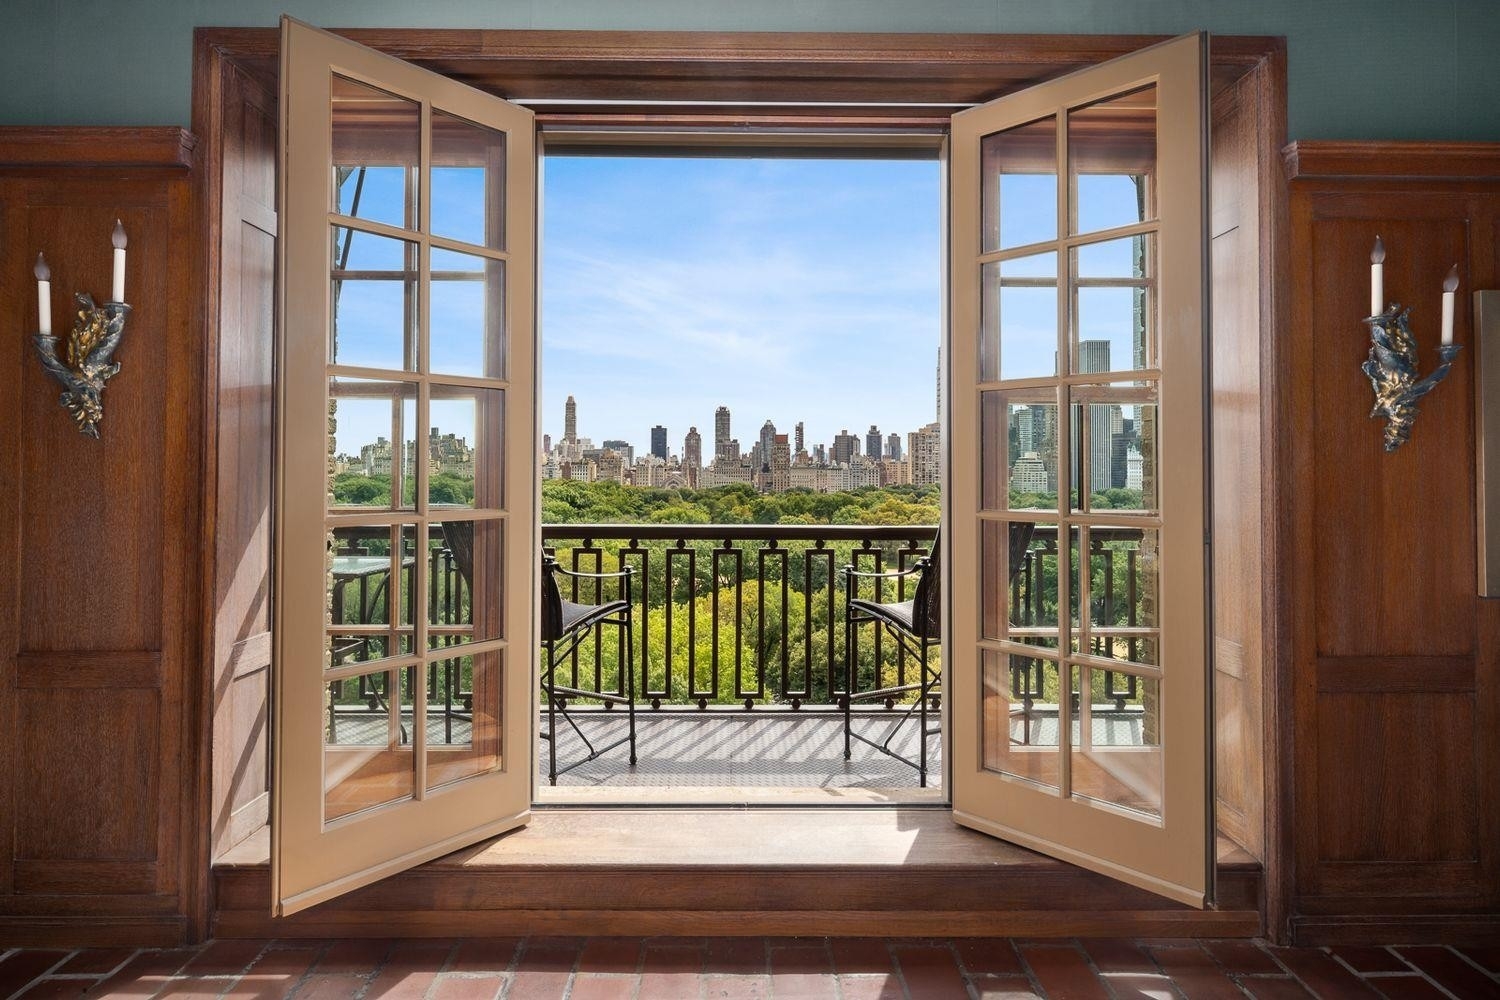 2. Co-op Properties for Sale at Harperley Hall, 41 CENTRAL PARK W, 11A Lincoln Square, New York, NY 10023